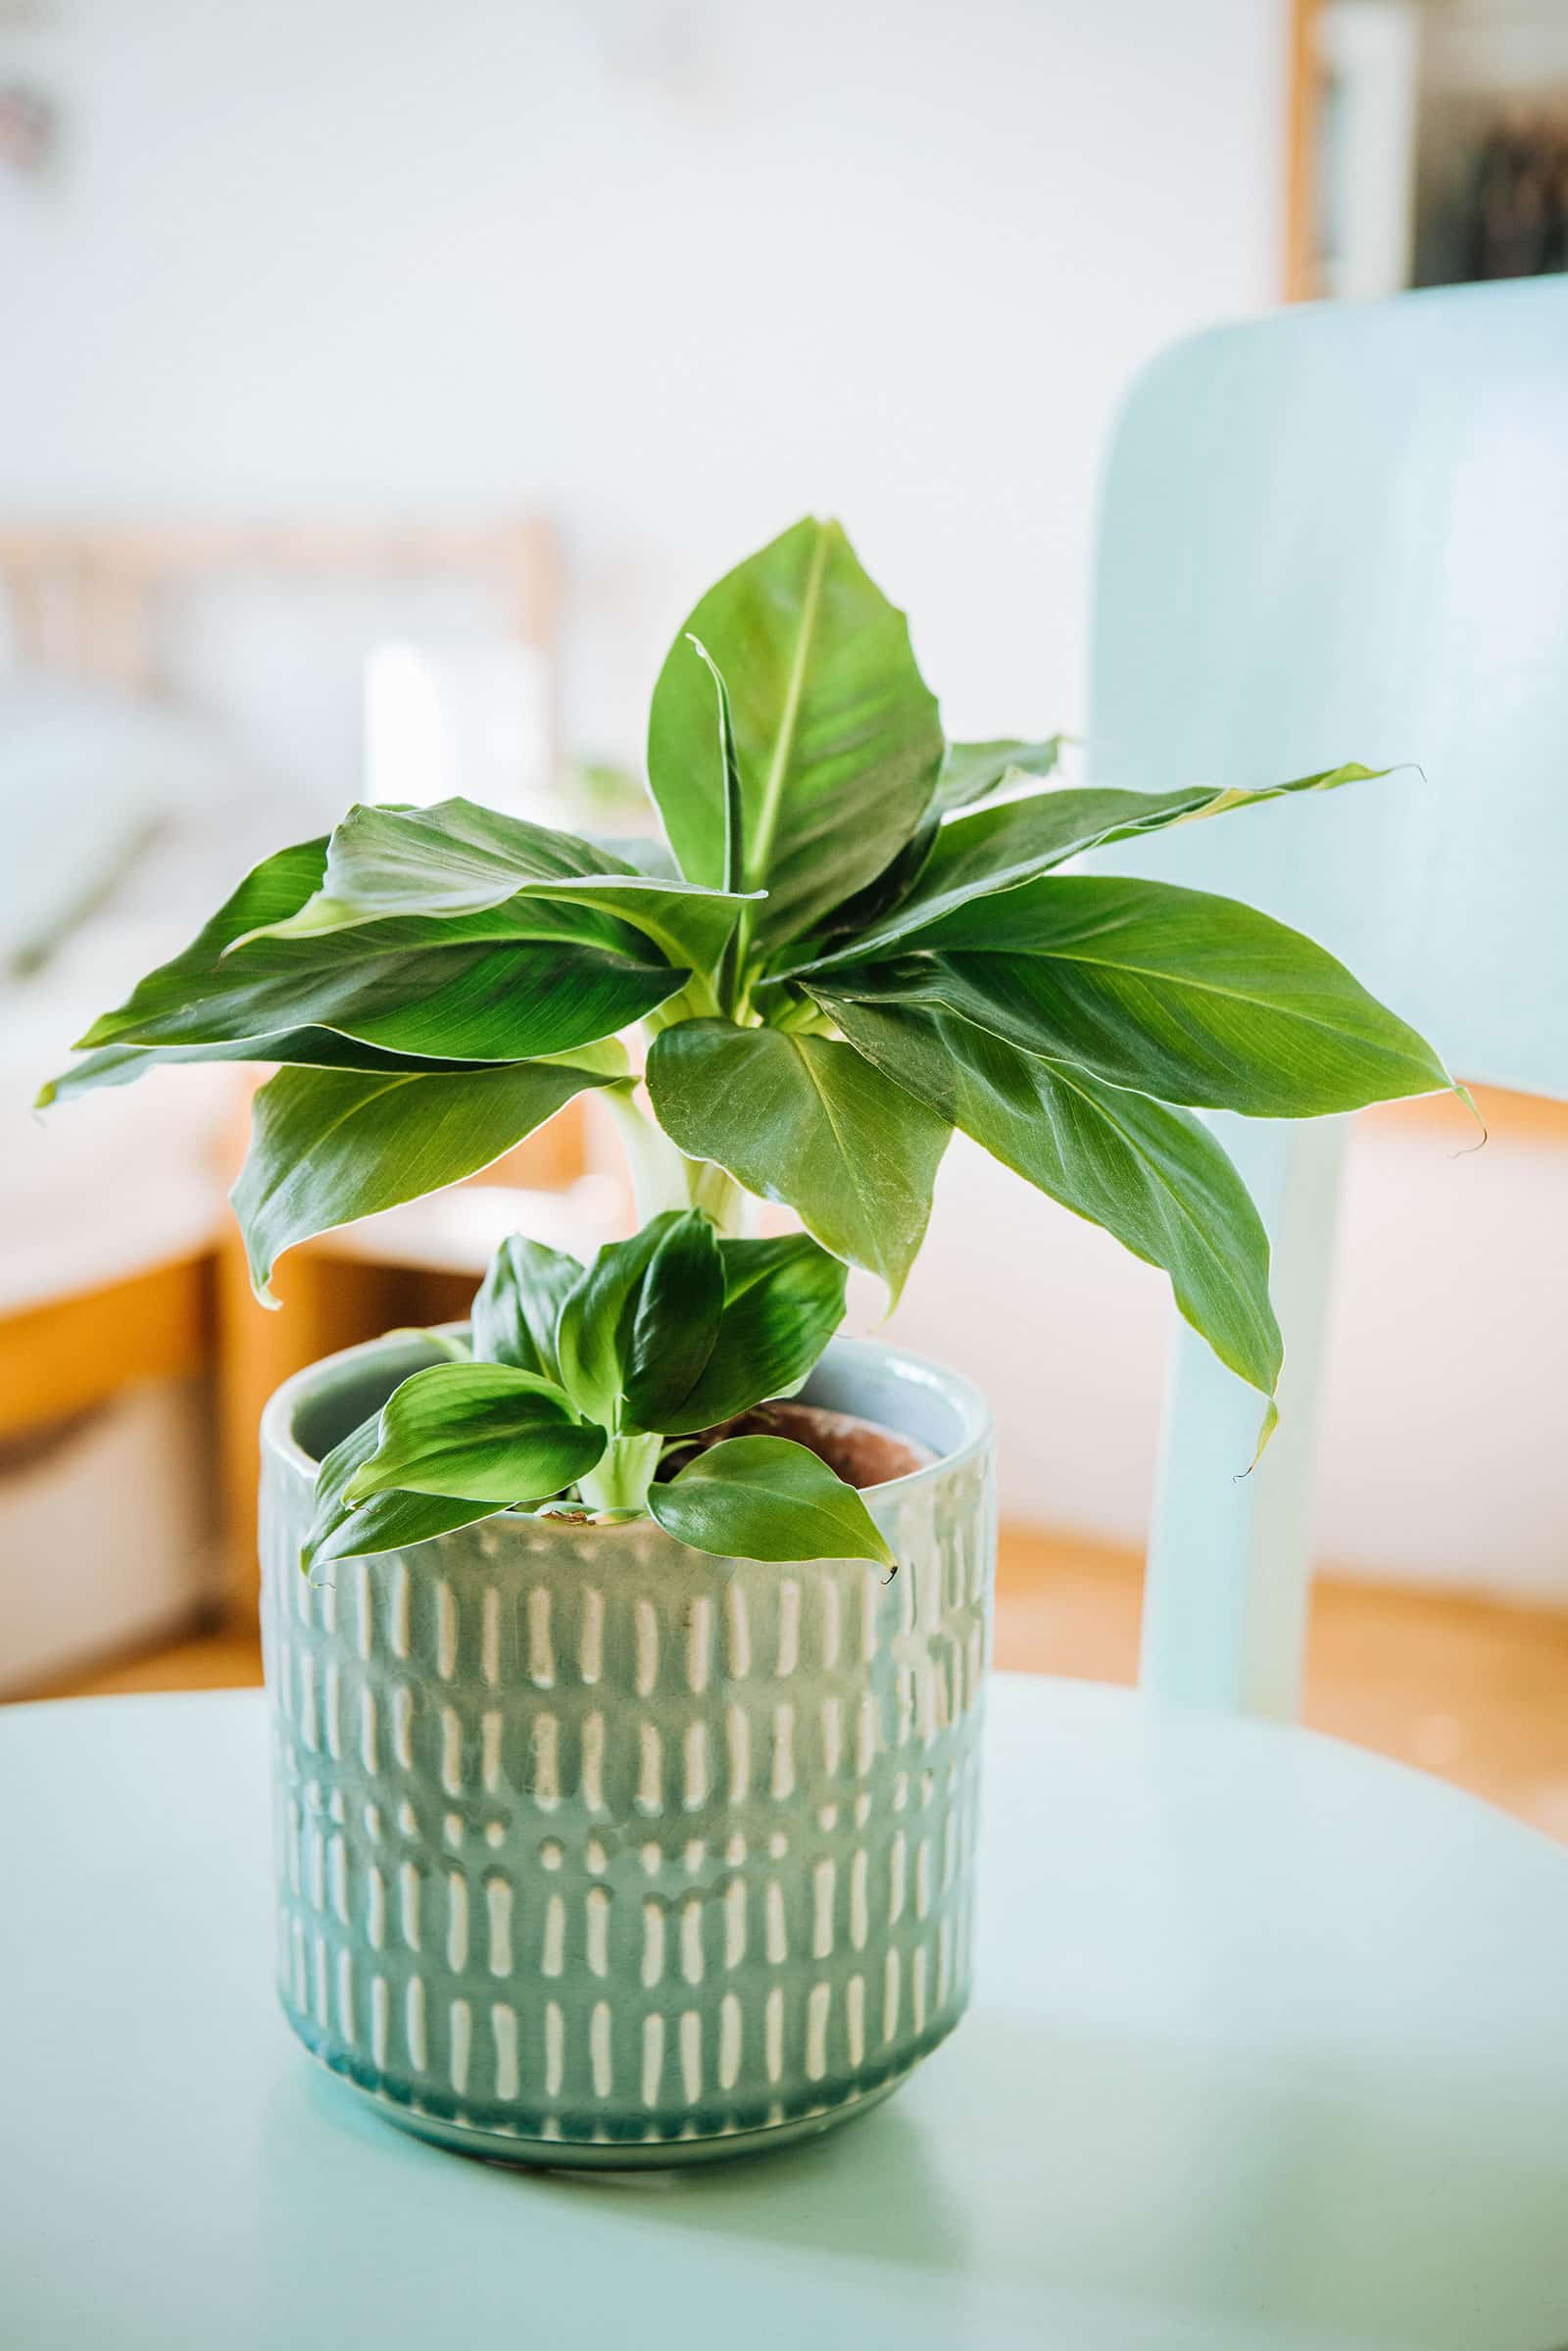 Small Dwarf Cavendish banana plant grown as a houseplant in a green ceramic pot